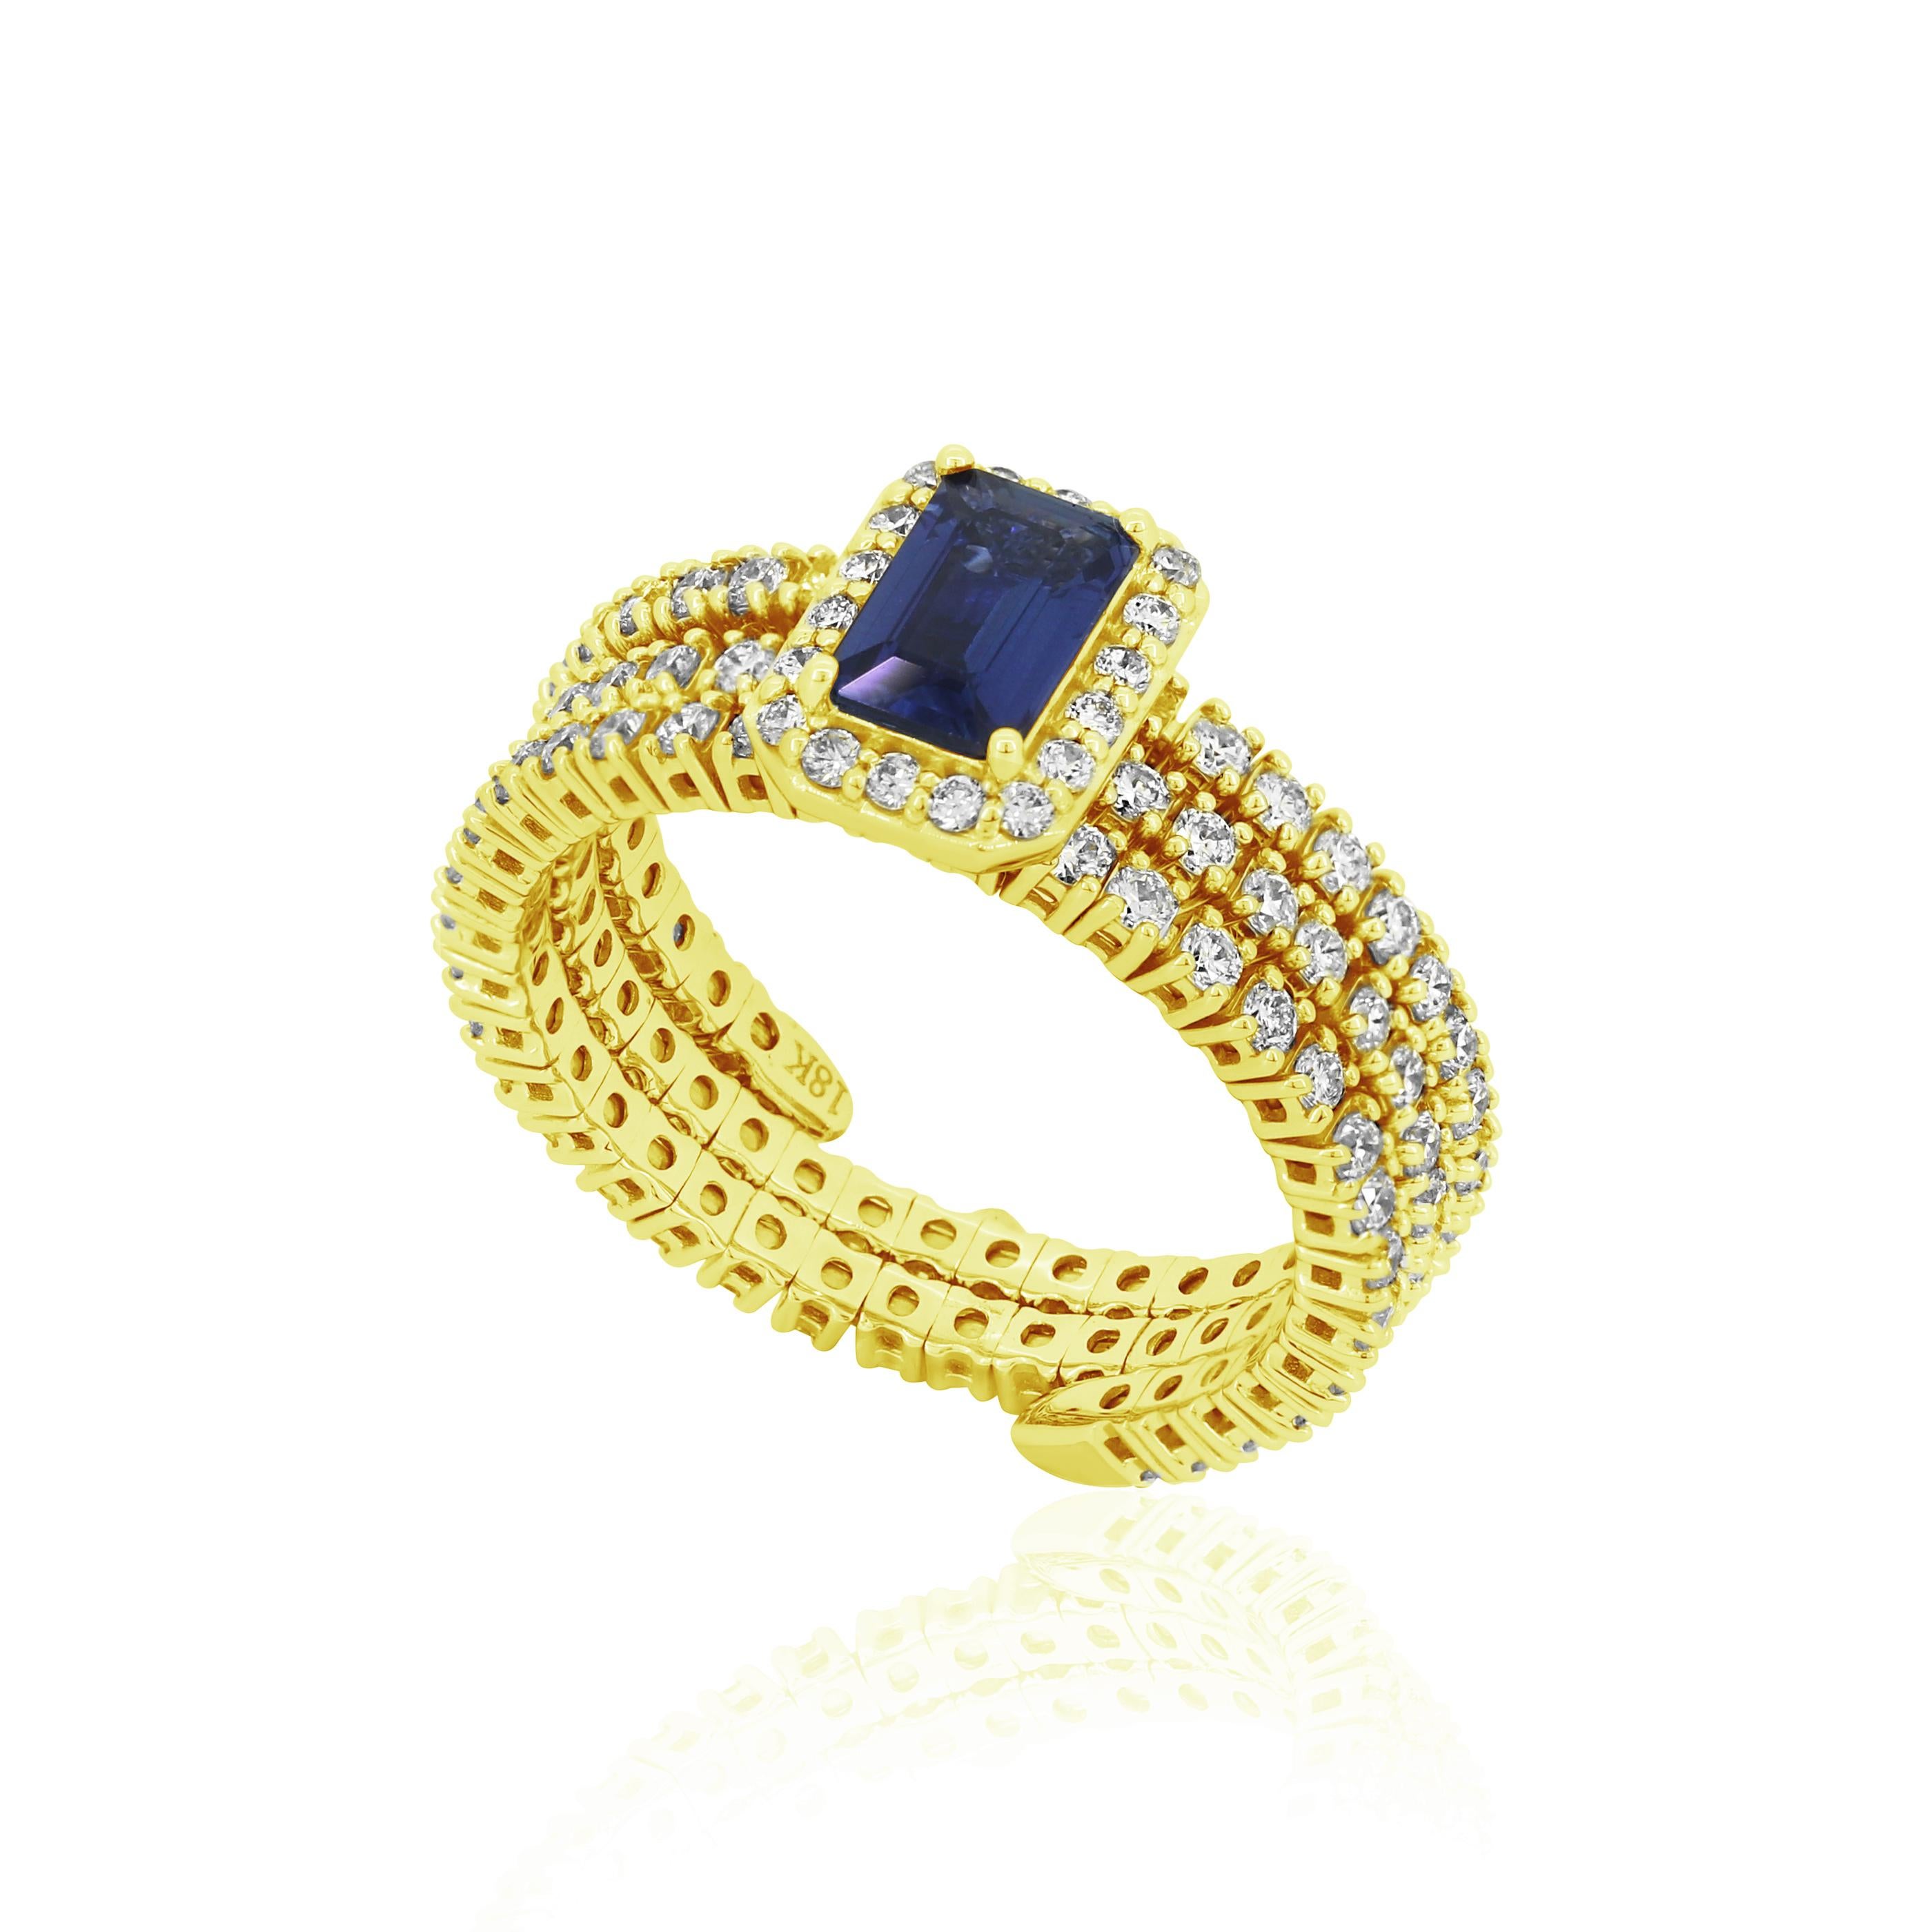 Octagon Cut Gemistry 1.57cttw Blue Sapphire and Diamond Adjustable Ring in 18k Yellow Gold For Sale